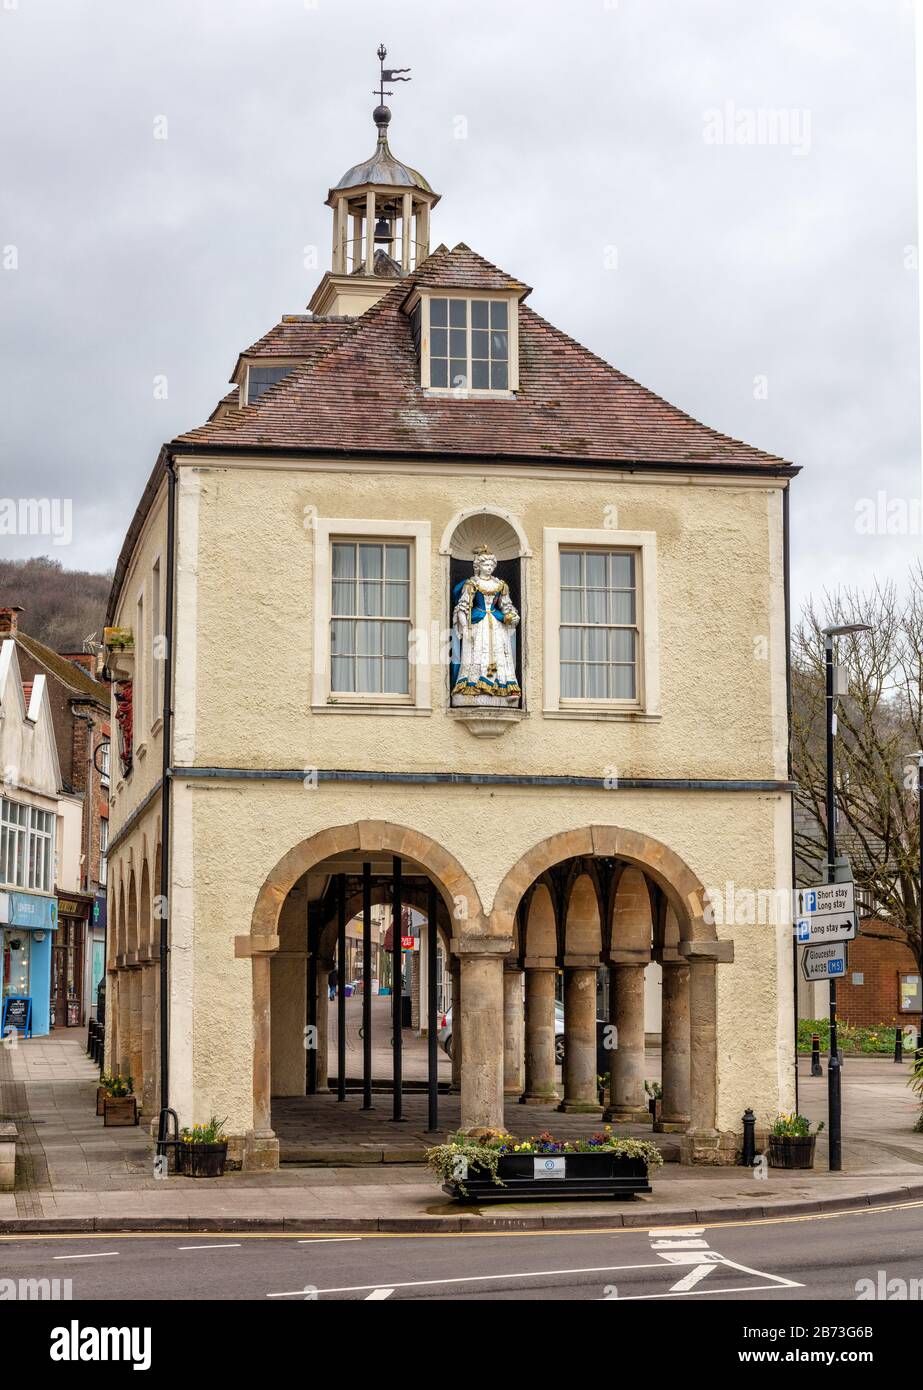 The 18th Century Market House with statue of Queen Anne in Dursley, Gloucestershire, England, United Kingdom Stock Photo